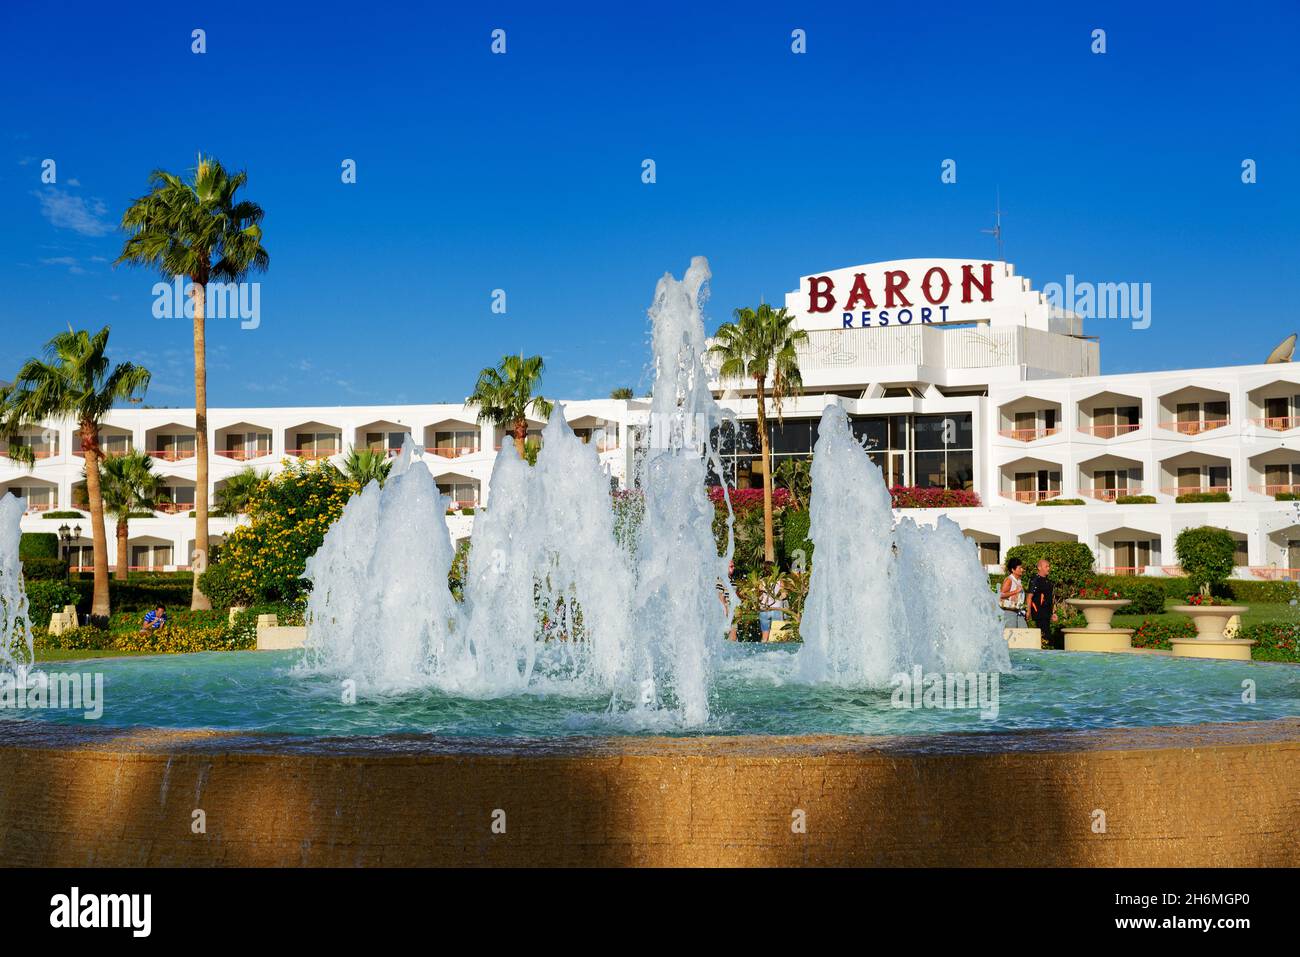 SHARM EL SHEIKH, EGYPT -  NOVEMBER 29: The tourists are on vacation at Baron resort luxury hotel on November 29, 2012 in Sharm el Sheikh, Egypt. Up to Stock Photo